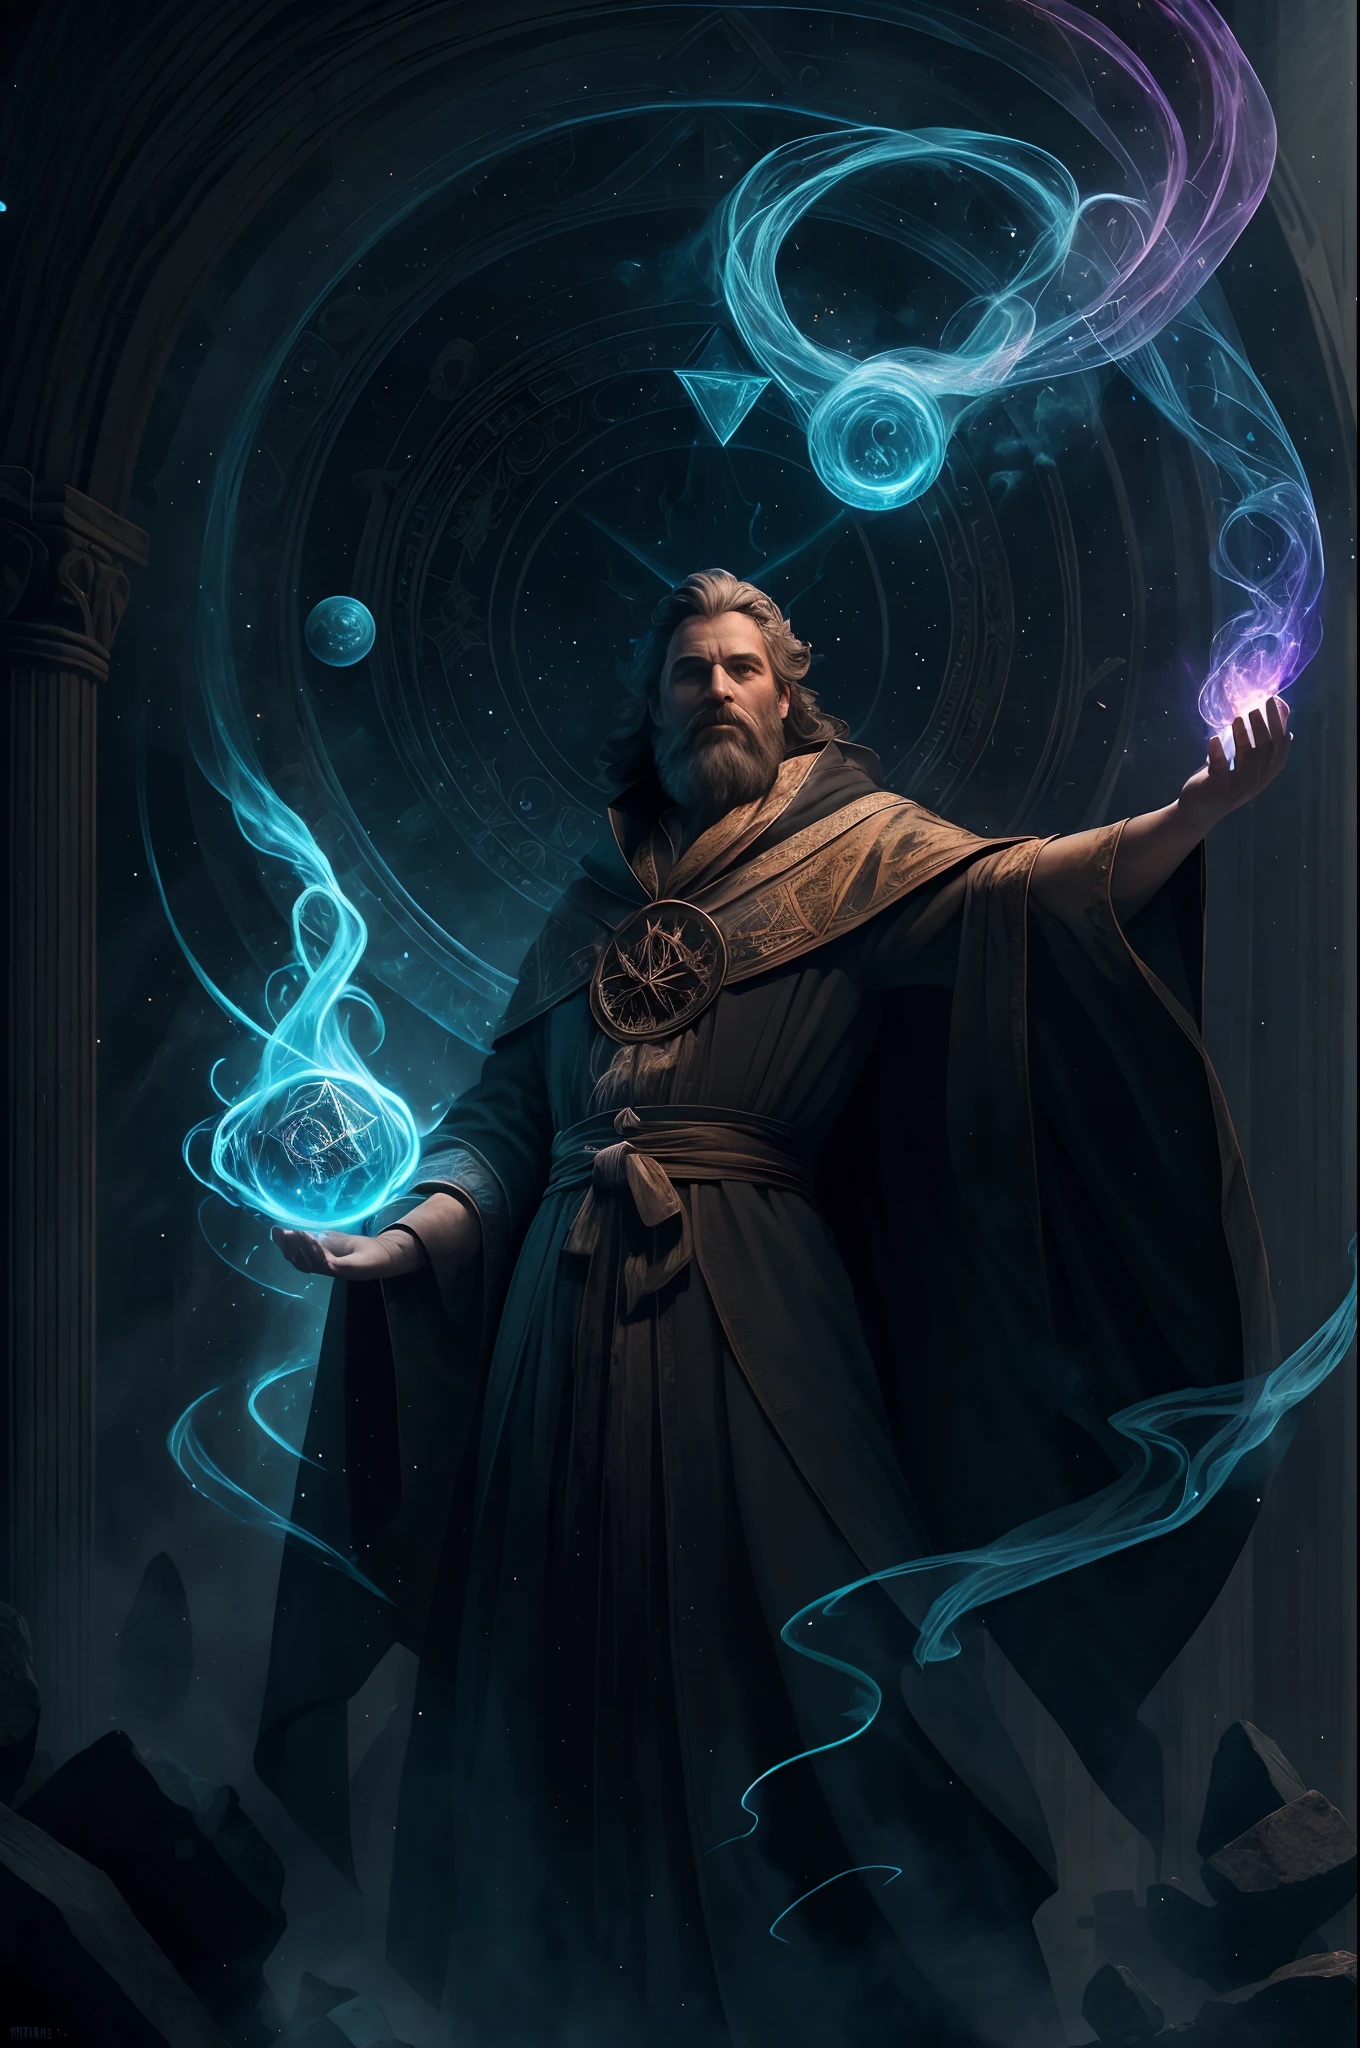 (A high resolution:1.2),Robe wizard with flowing cloak,casting a powerful spell,Raise your arm with one hand and soar into the sky,Summon a dazzling beam,A magical mark is created in the sky,Glowing runes and symbols rotate in the air,The other hand levitates with a magic wand,The beard and hair flow with mysterious energy,A crackling aura of magical energy surrounded him,Majestic and old atmosphere,Mysterious smoke and sparks,Faintly glowing eyes,A powerful incantation on the lips,Magical energy beating from your fingertips,The background is full of ancient ruins and mysterious artifacts,Cast spells that distort reality and distort space,A wisp of subtle magic fog,Full of otherworldly power,Cast spells of immense power,Concentrate and concentrate expression,Starry sky and celestial constellations,Sparkling bright colors,Illuminated by enchanting moonlight,Cast a spell back into the universe.